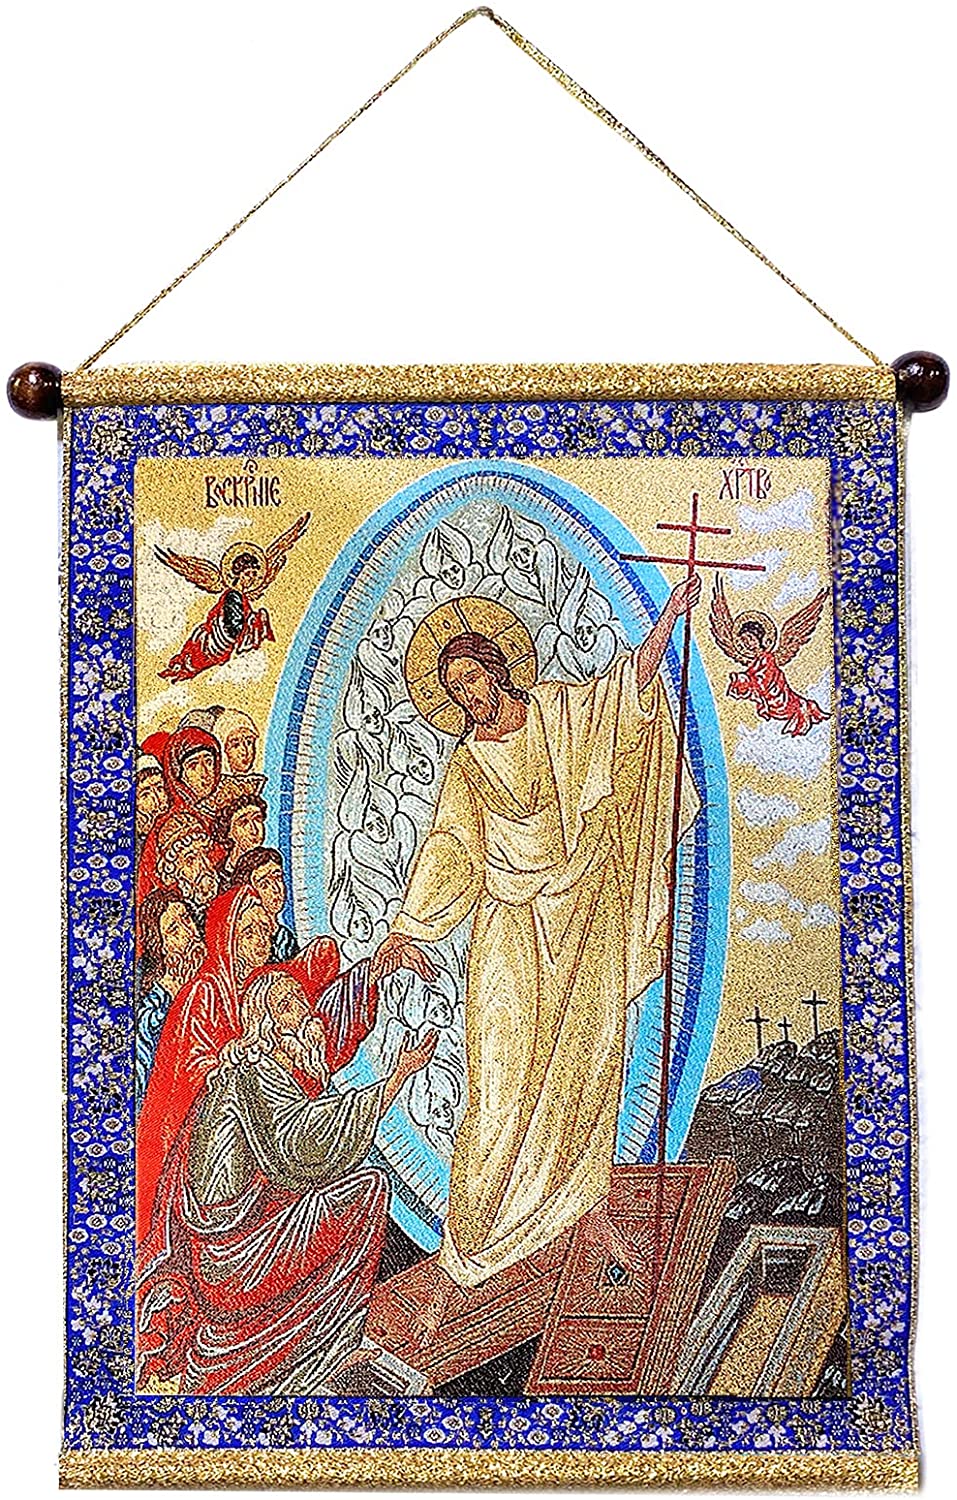 Tapestry Ican banner art decoration